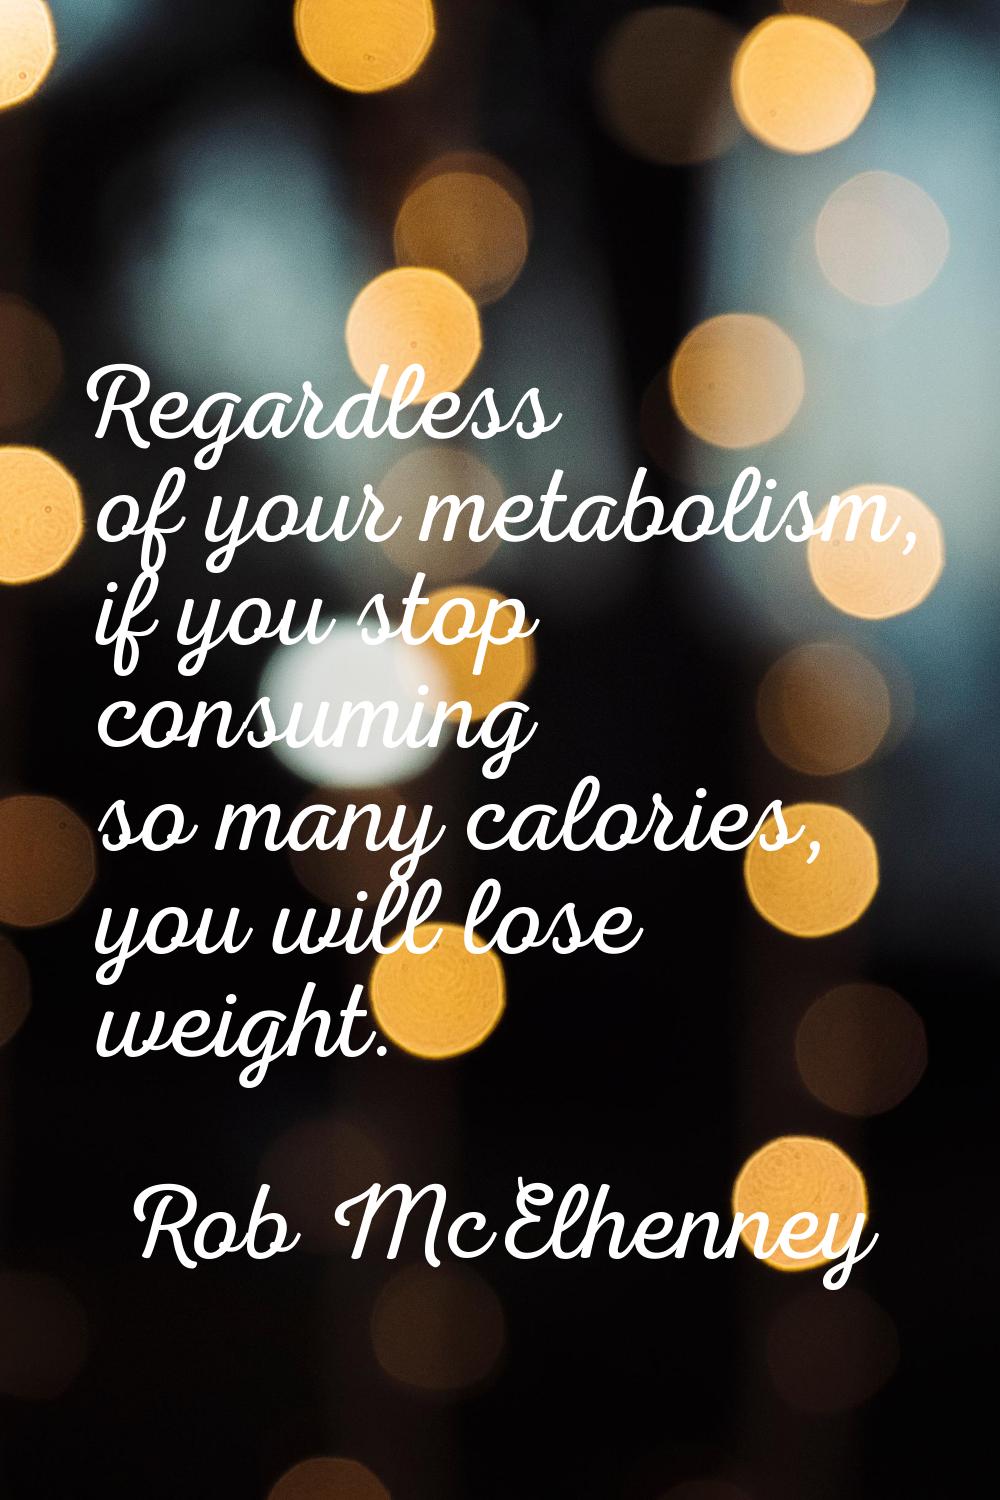 Regardless of your metabolism, if you stop consuming so many calories, you will lose weight.